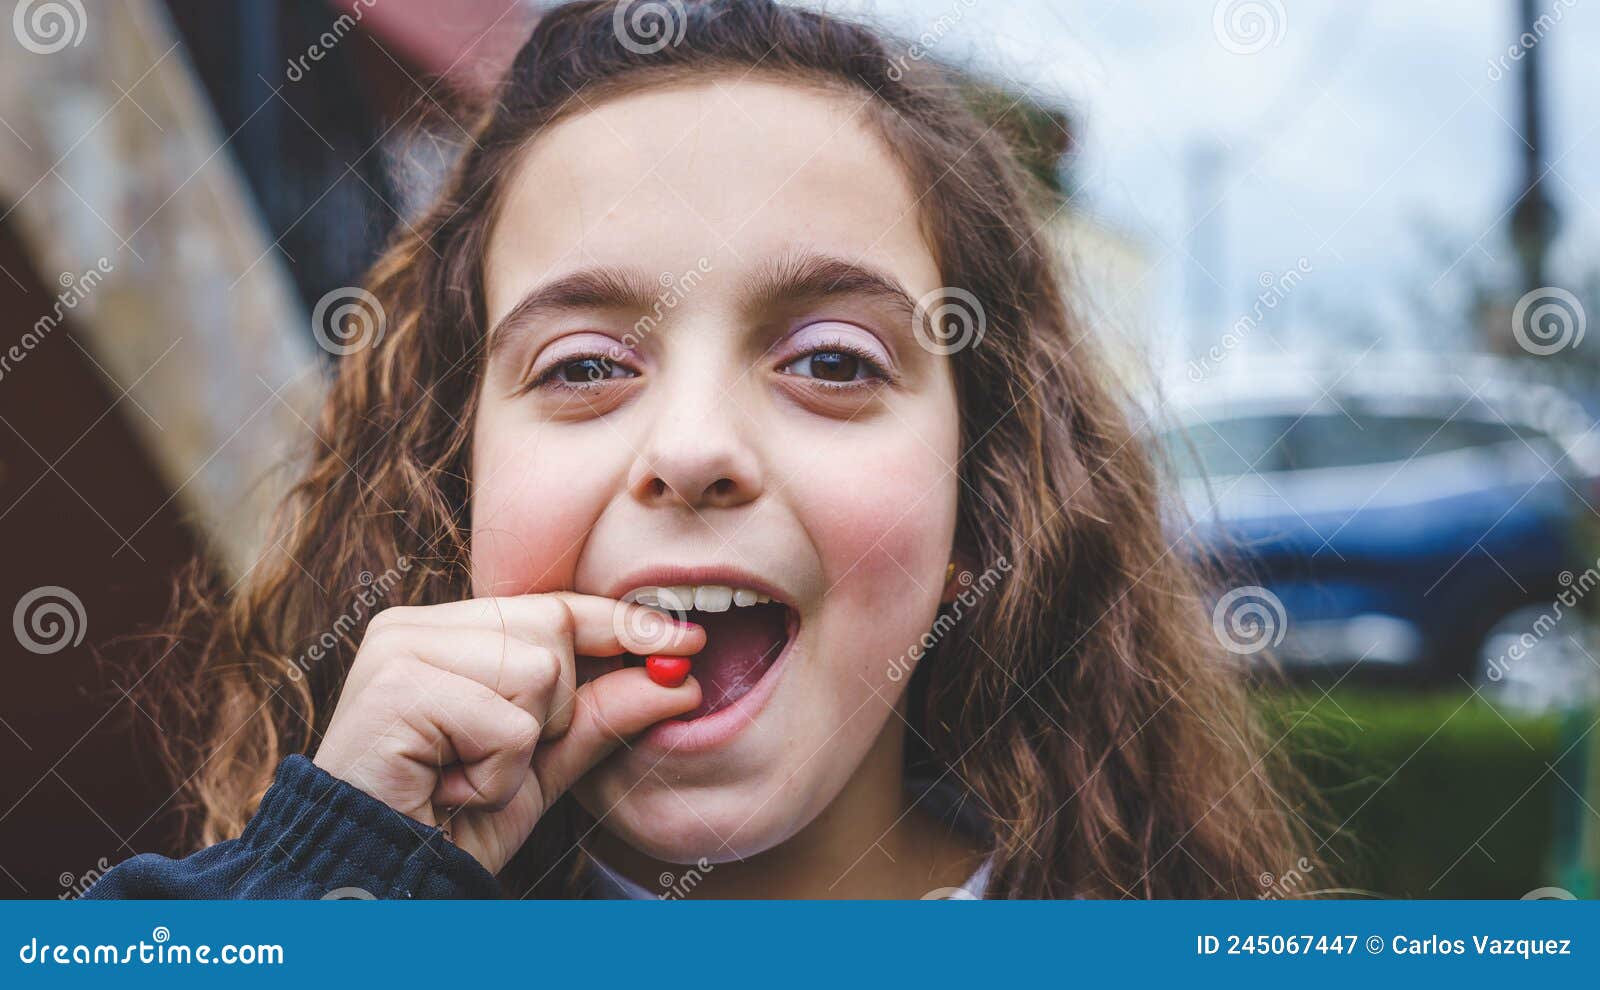 girl with red fruit